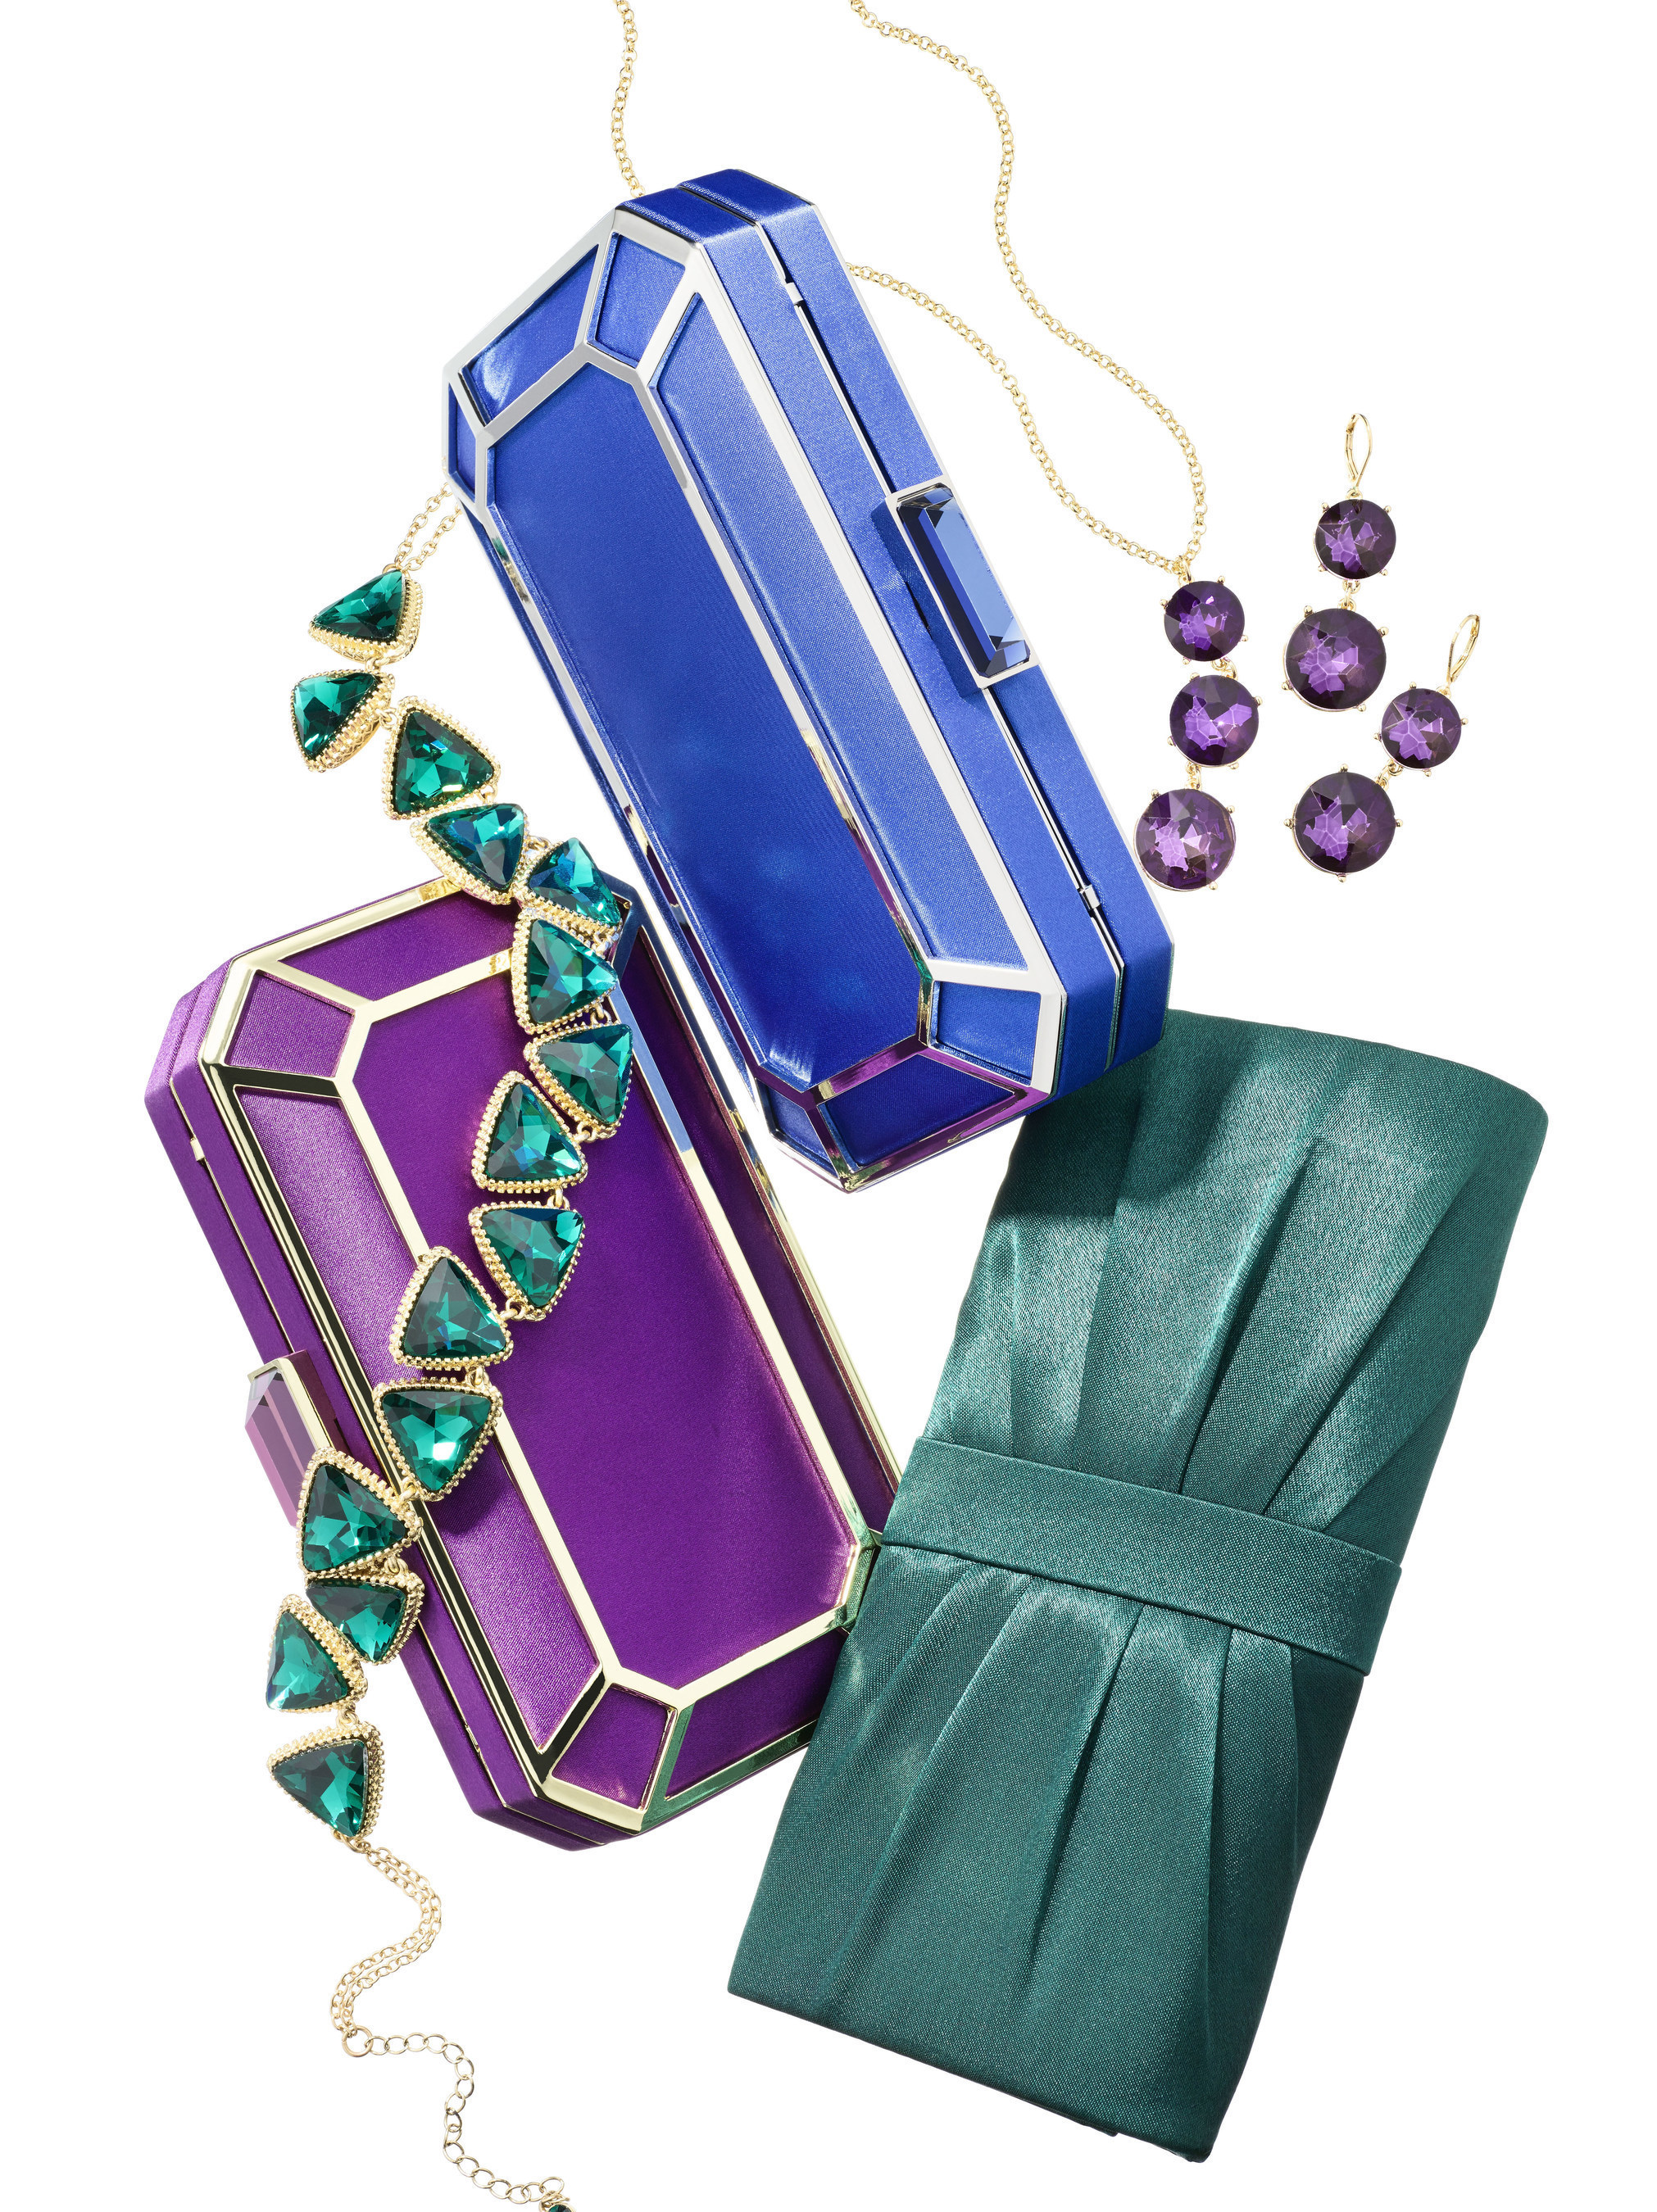 Evening Clutches and Statement Jewels from the Charming Charlie Crown Jewels Collection $13 to $29